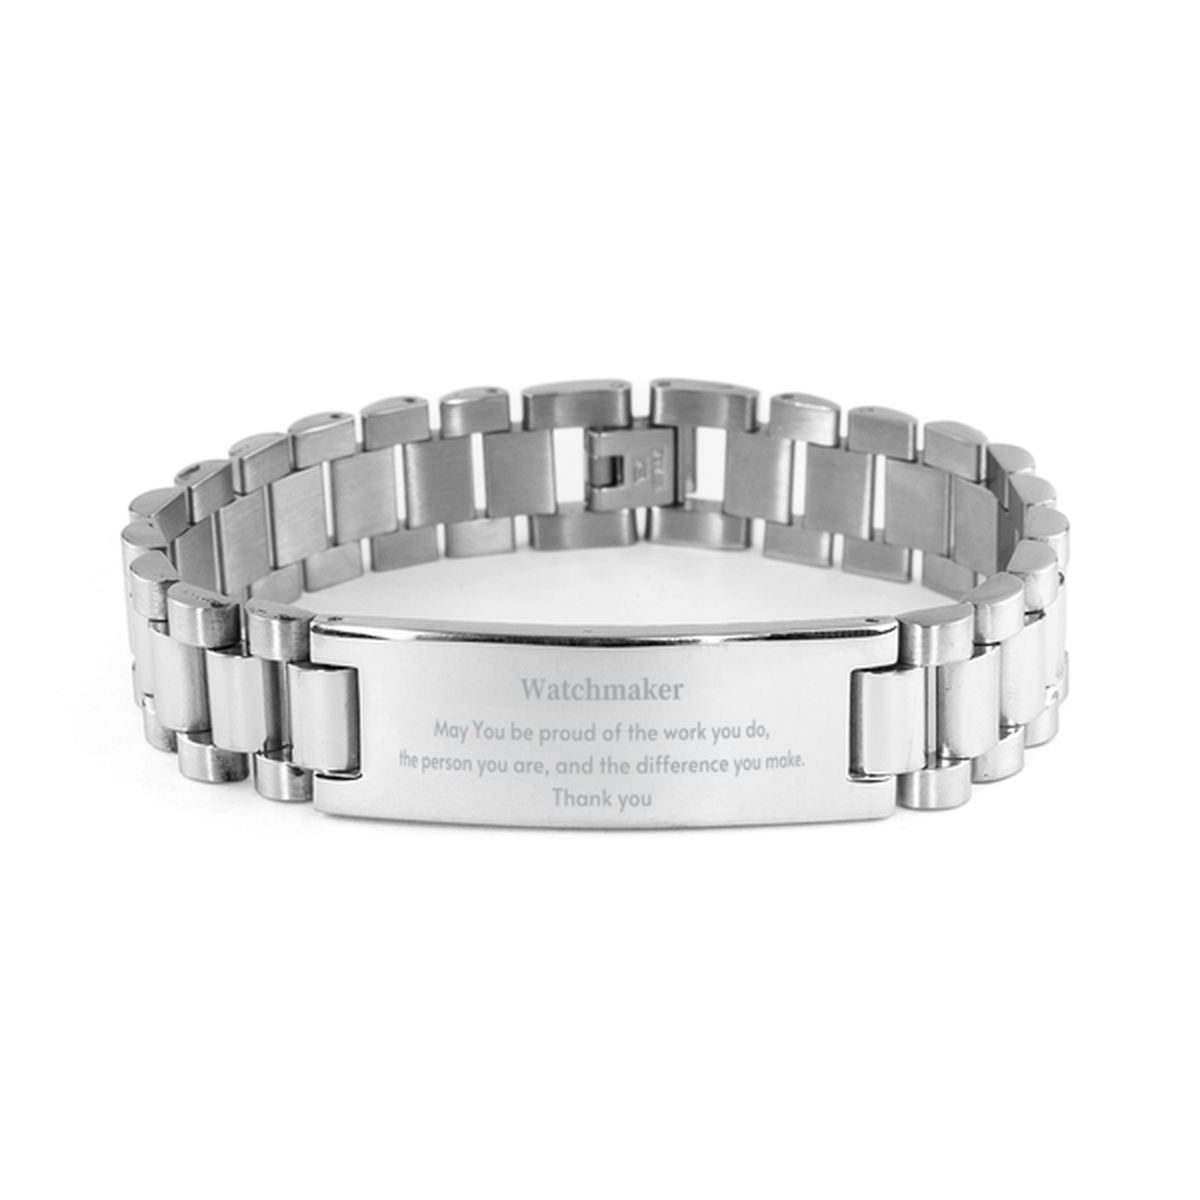 Heartwarming Ladder Stainless Steel Bracelet Retirement Coworkers Gifts for Watchmaker, Watchmaker May You be proud of the work you do, the person you are Gifts for Boss Men Women Friends